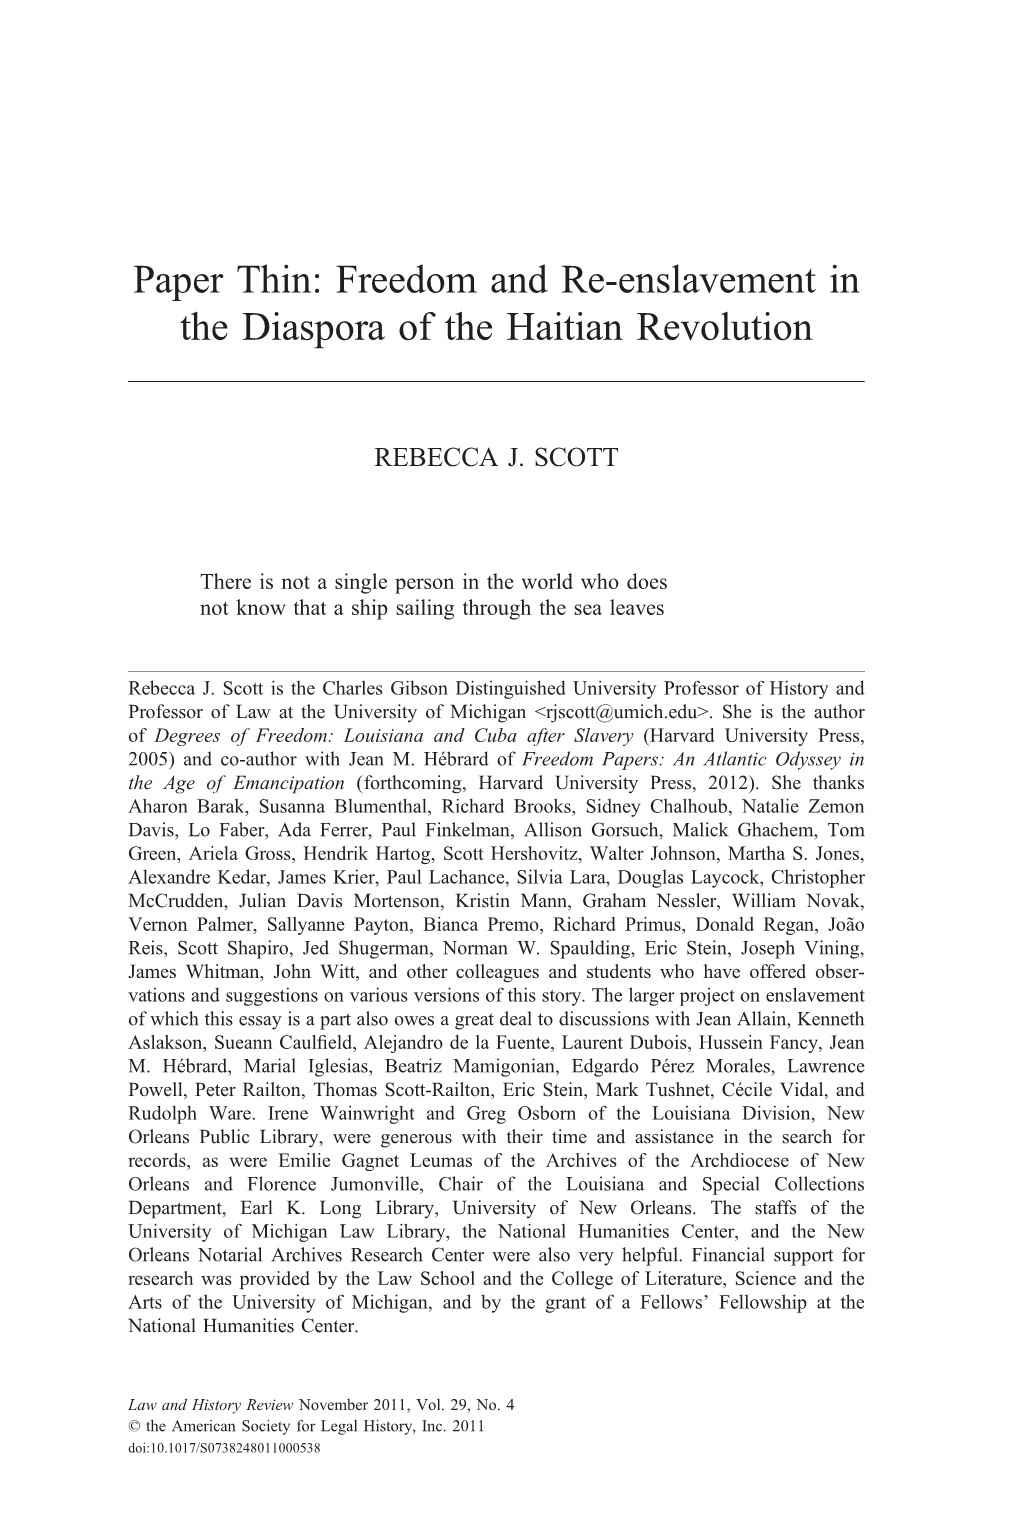 Paper Thin: Freedom and Re-Enslavement in the Diaspora of the Haitian Revolution